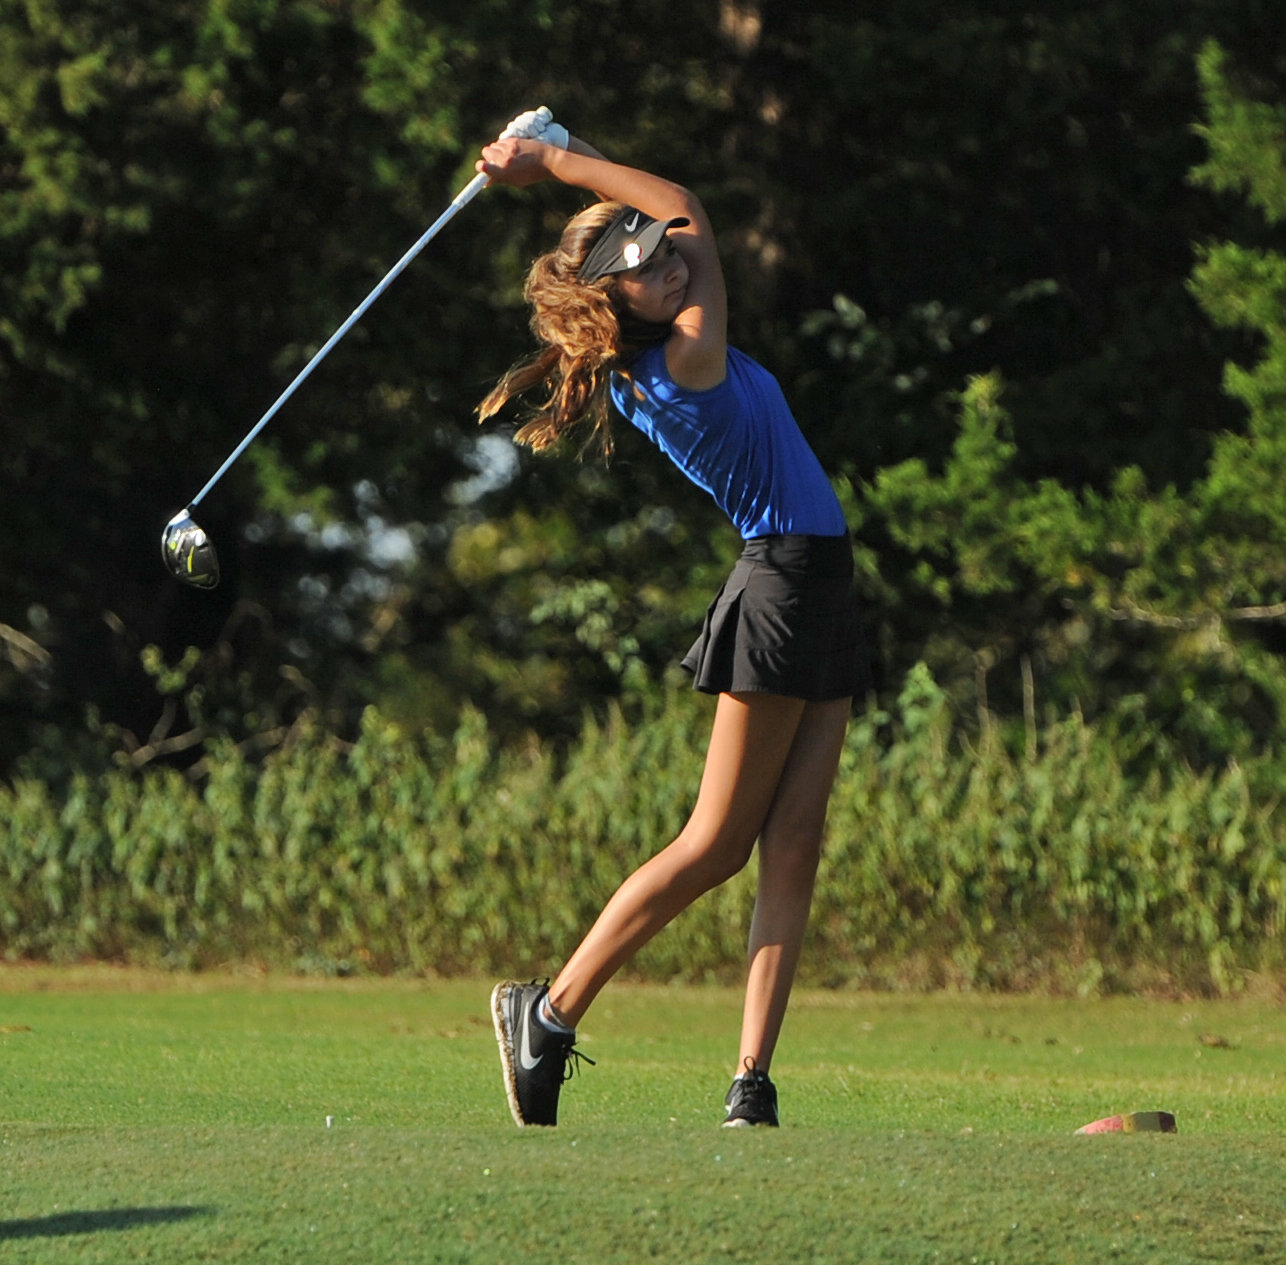 Maggie Browning shot a 182 to finish 23rd overall in the Class A state girls golf tournament.